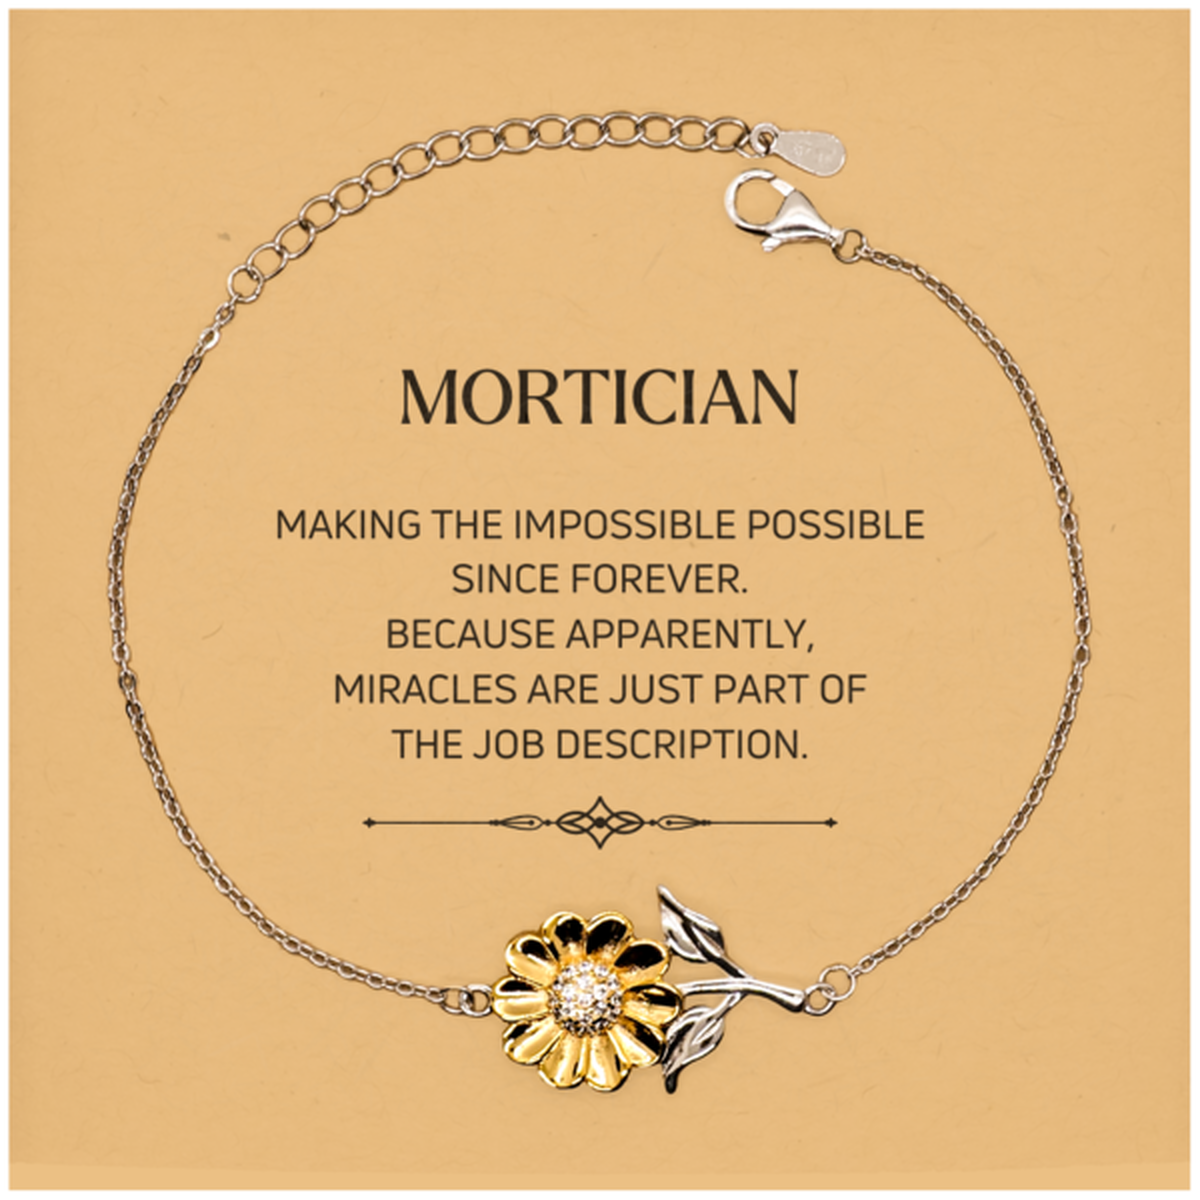 Funny Mortician Gifts, Miracles are just part of the job description, Inspirational Birthday Christmas Sunflower Bracelet For Mortician, Men, Women, Coworkers, Friends, Boss